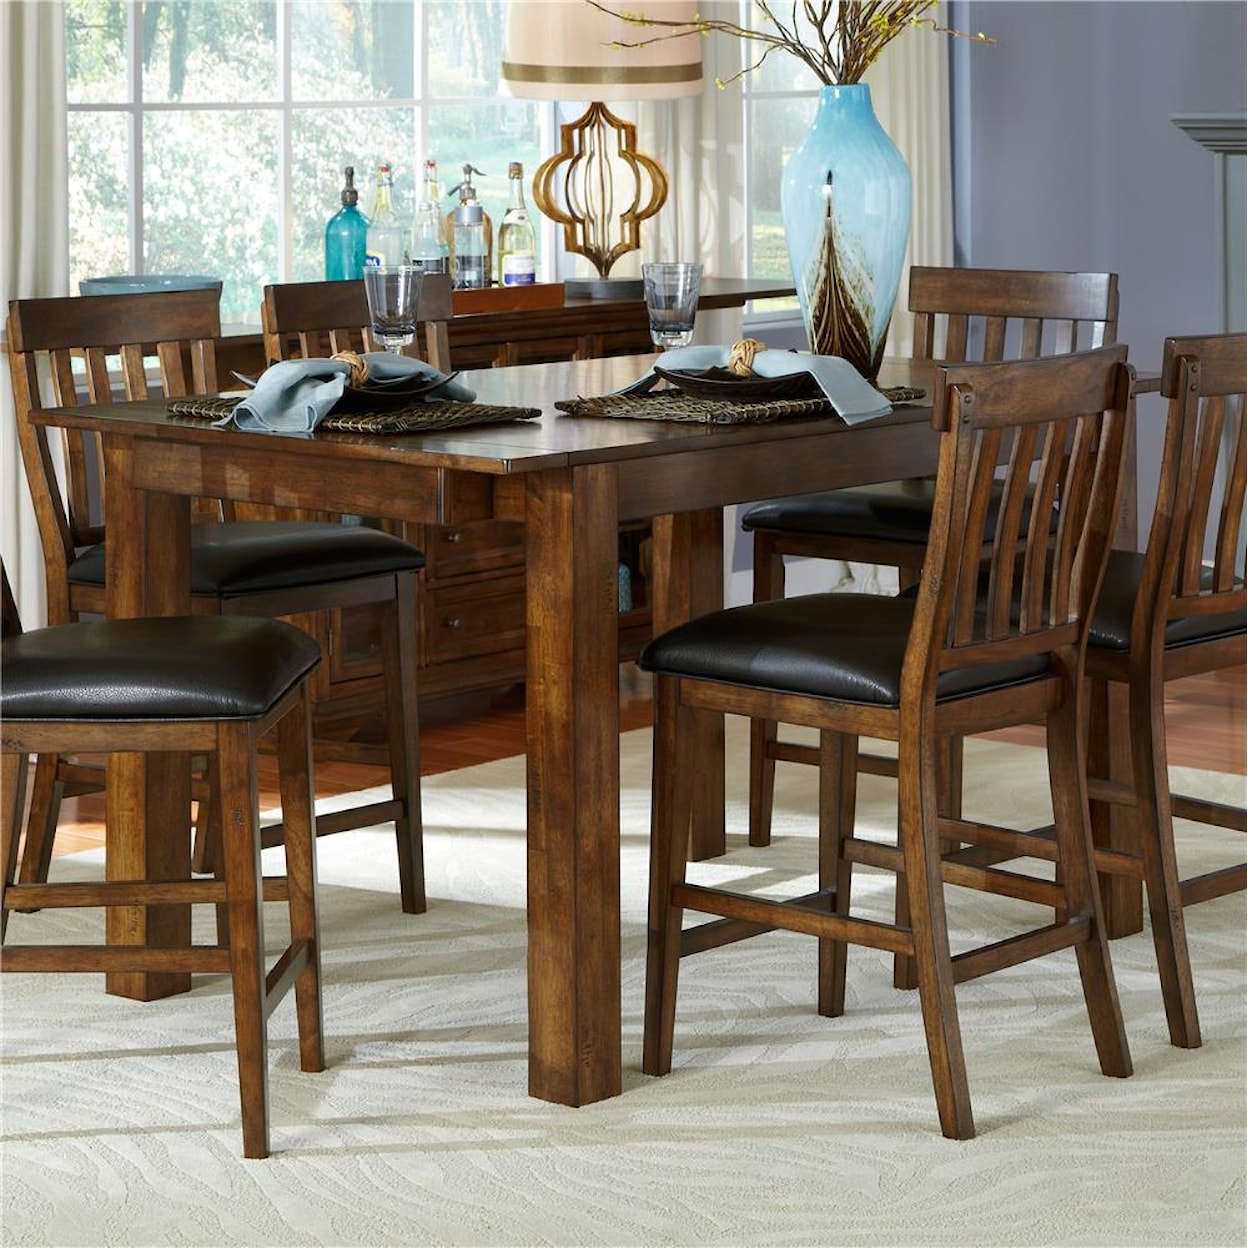 AAmerica Mariposa 9 Piece Counter Height Dining Room